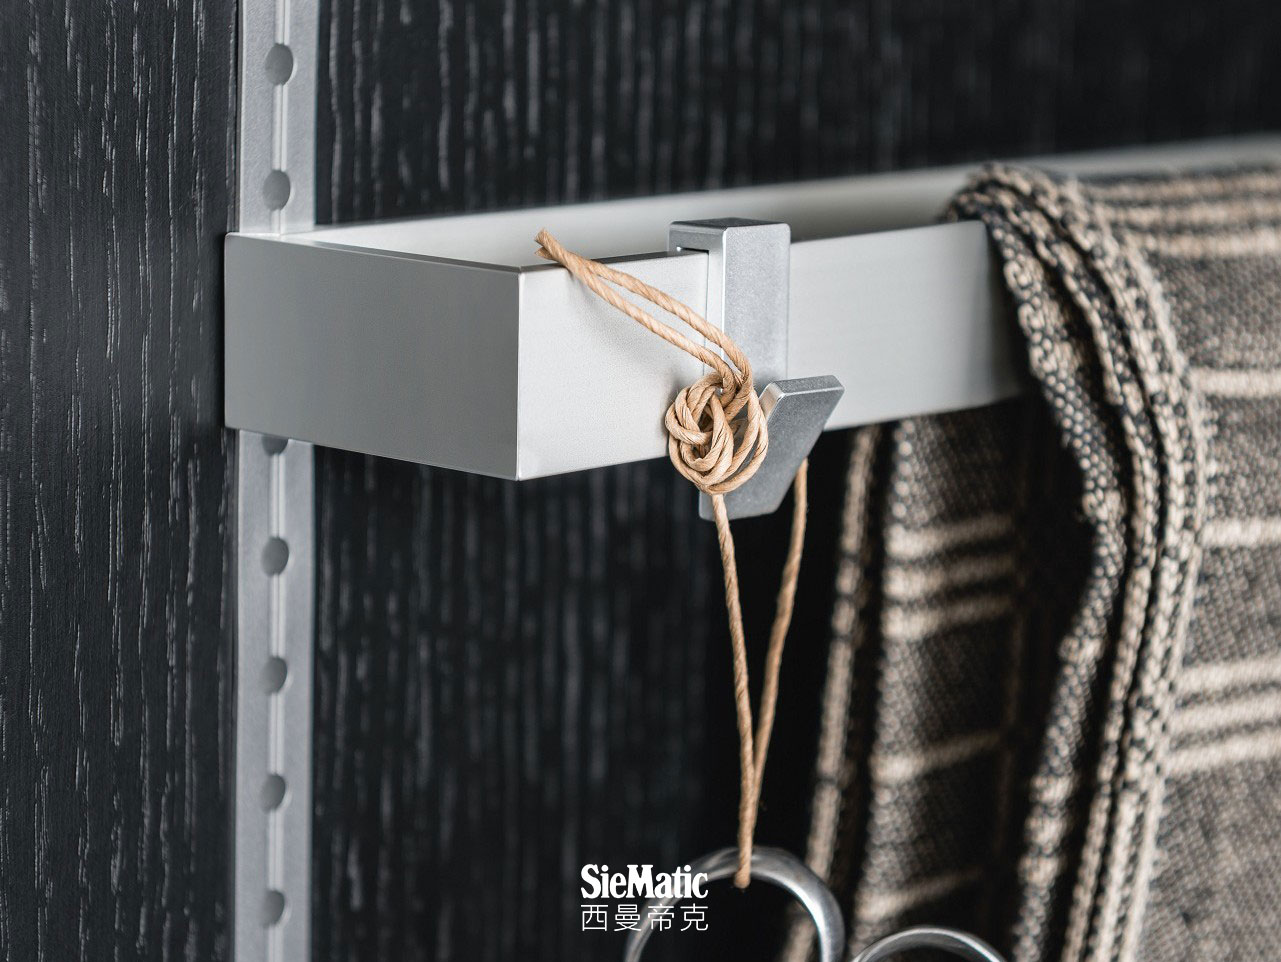 Dishcloth rack and hooks from the SieMatic MultiMatic interior organization system for kitchen cabinet doors